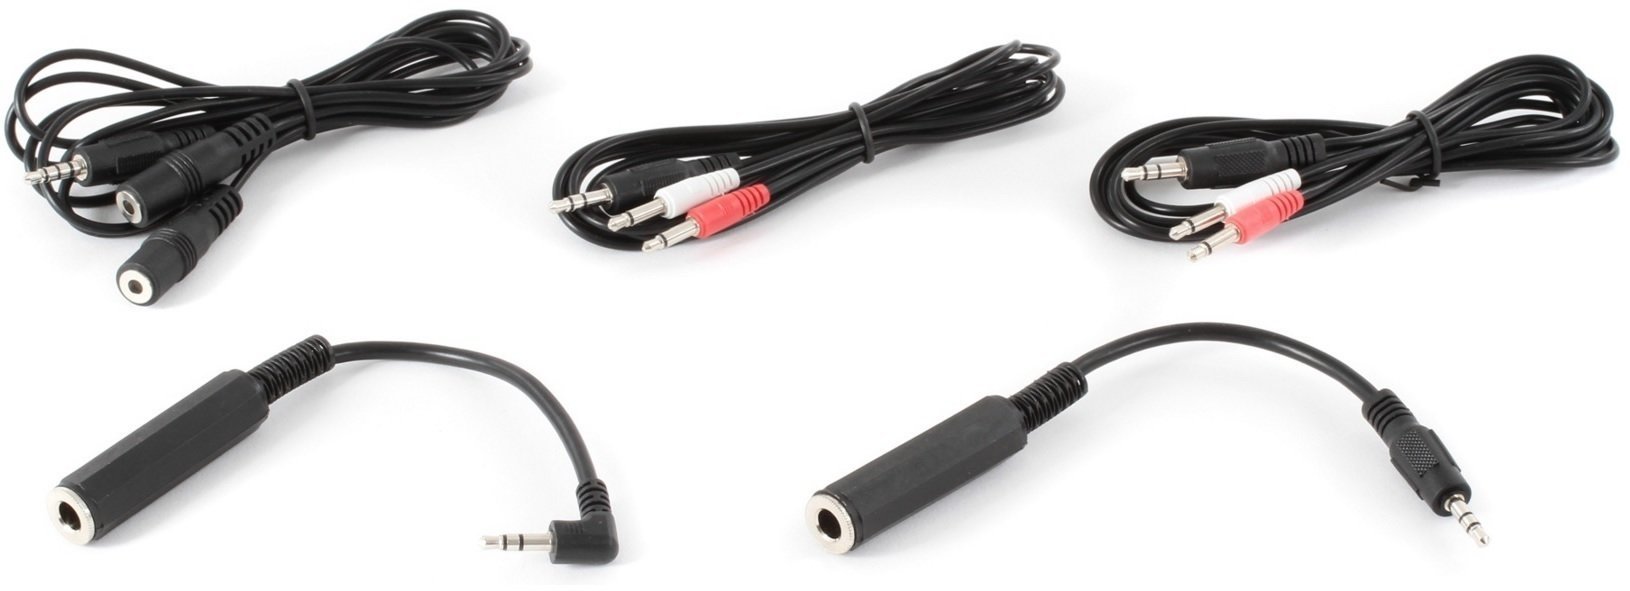 Audio Cable Keith McMillen CV Cable Kit